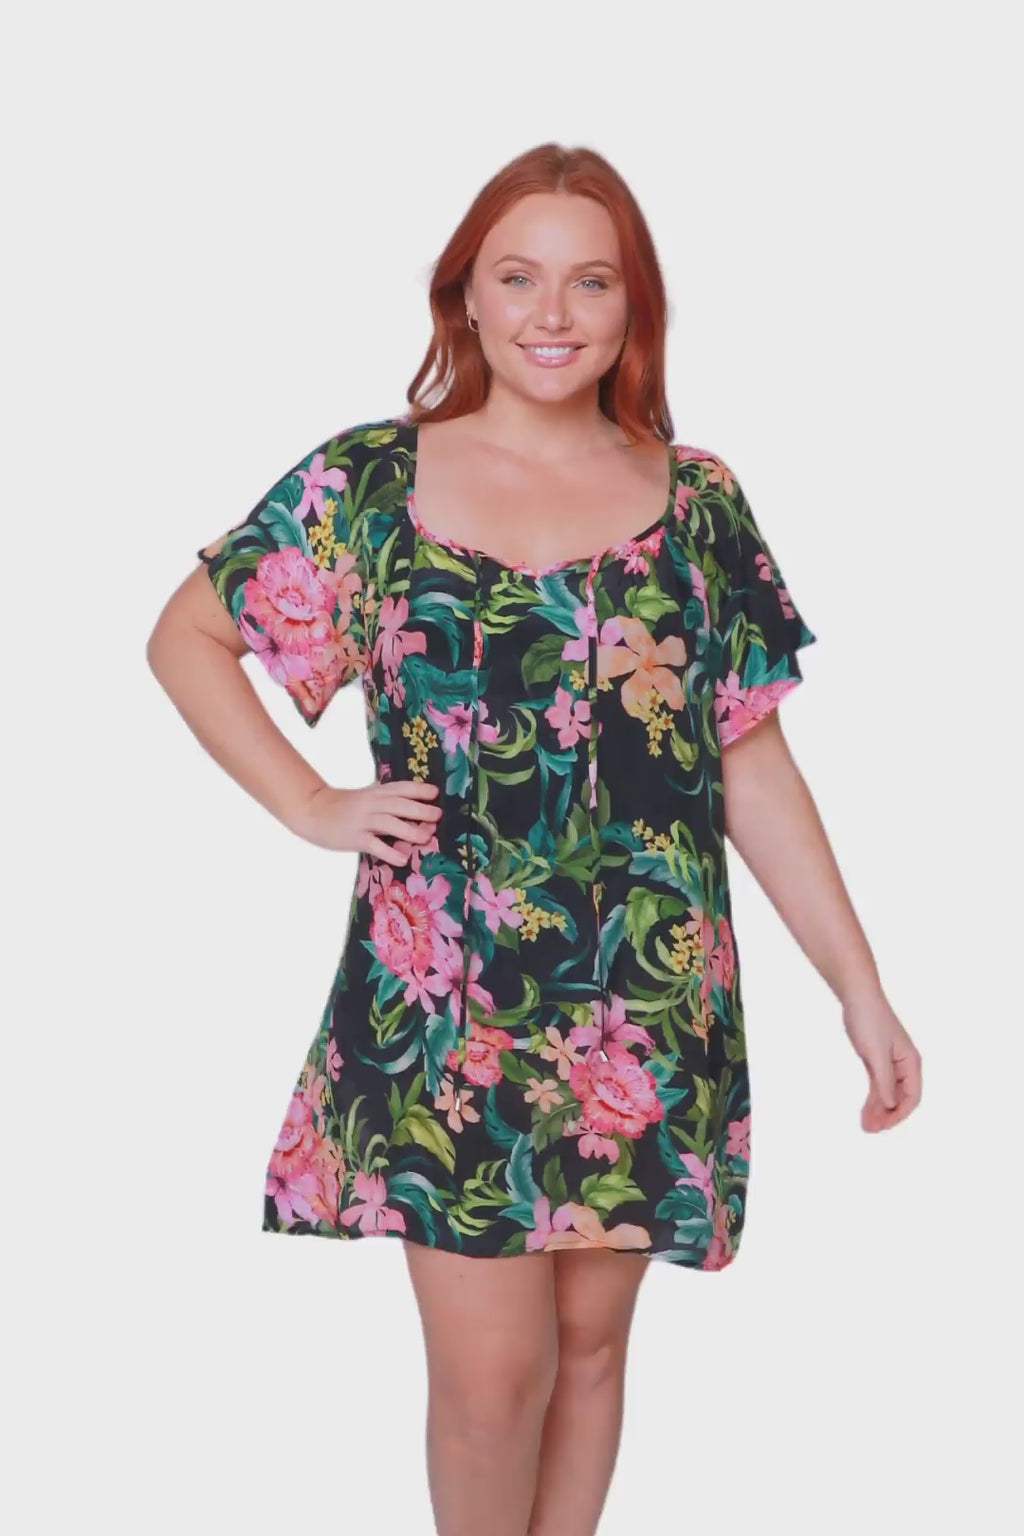 Plus size red head model wears floral green mesh beach cover up